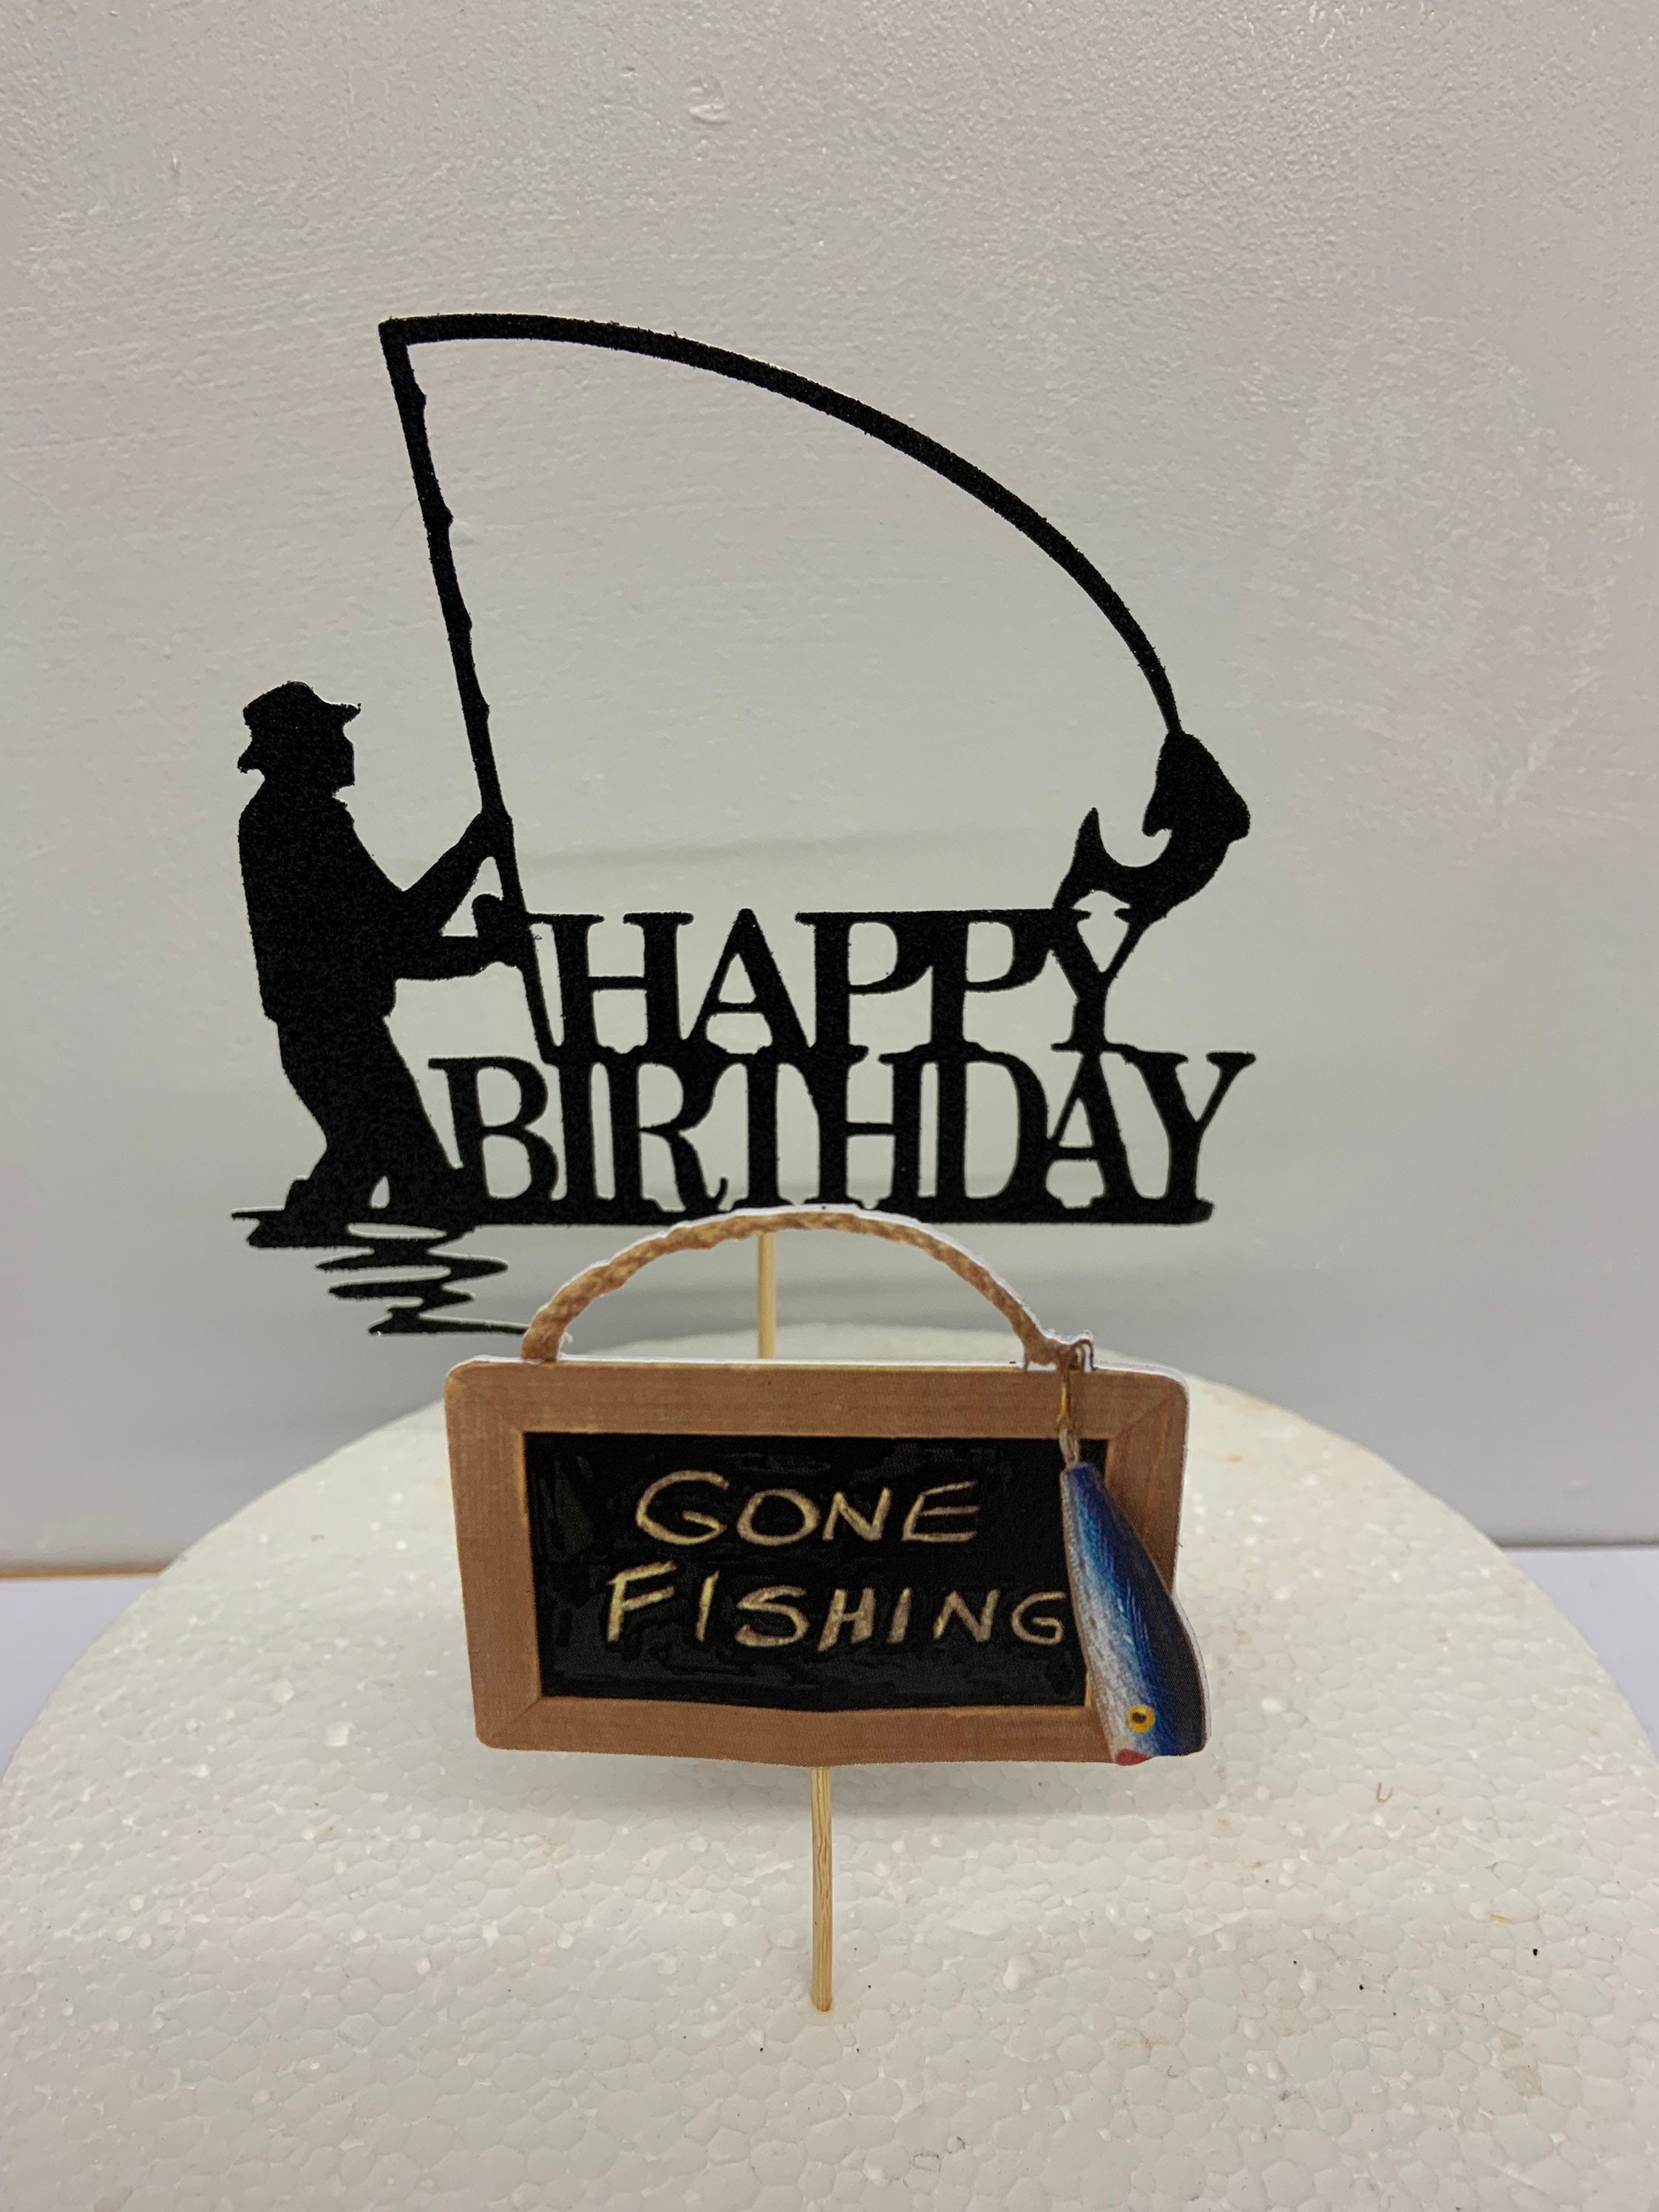 Gone Fishing Cake Toppers Set, Fishing Theme Cake Toppers 